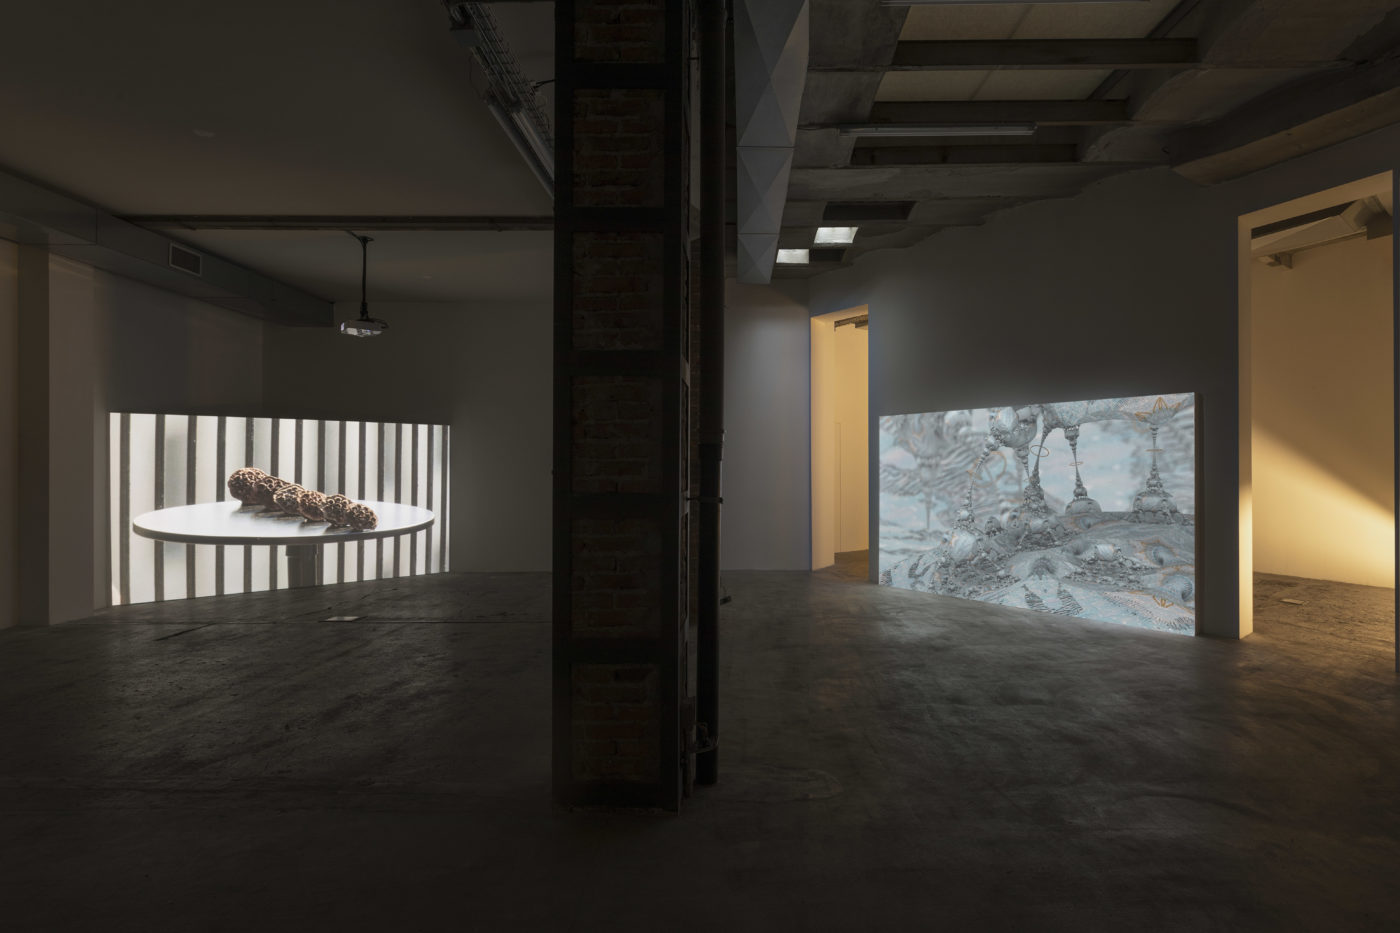 Andrew Norman Wilson, “Lavender Town Syndrome” exhibition view, Ordet, Milan, 2019/2020